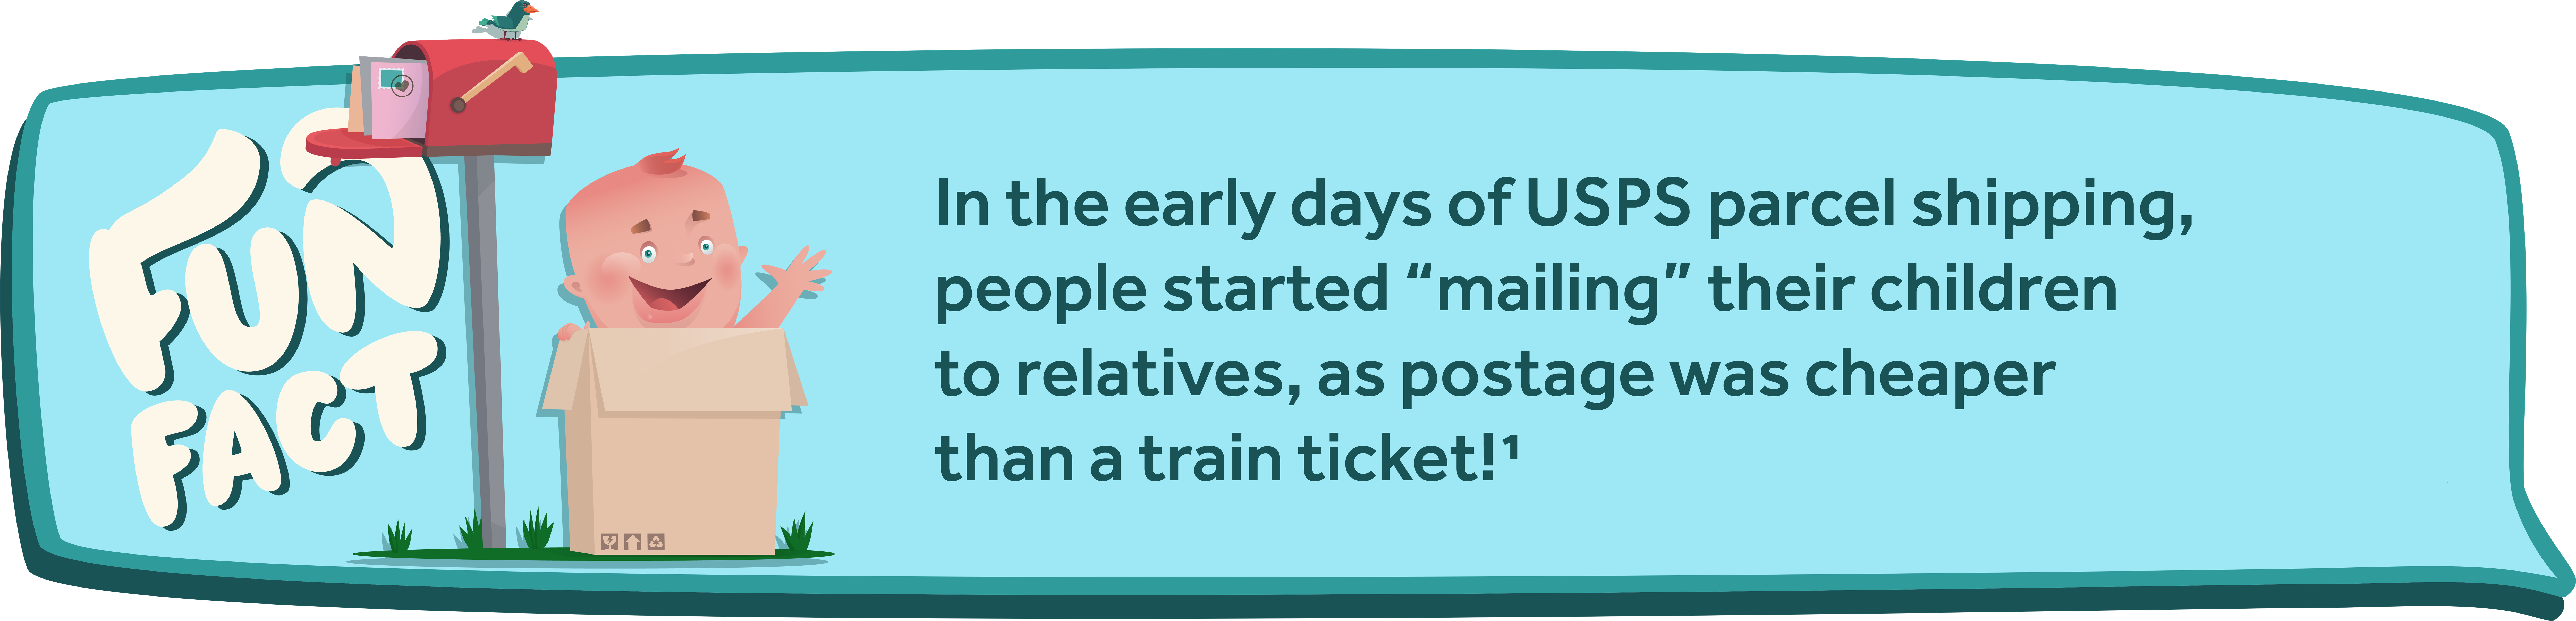 In the early days of USPS parcel shipping, people started “mailing” their children to relatives, as postage was cheaper than a train ticket!